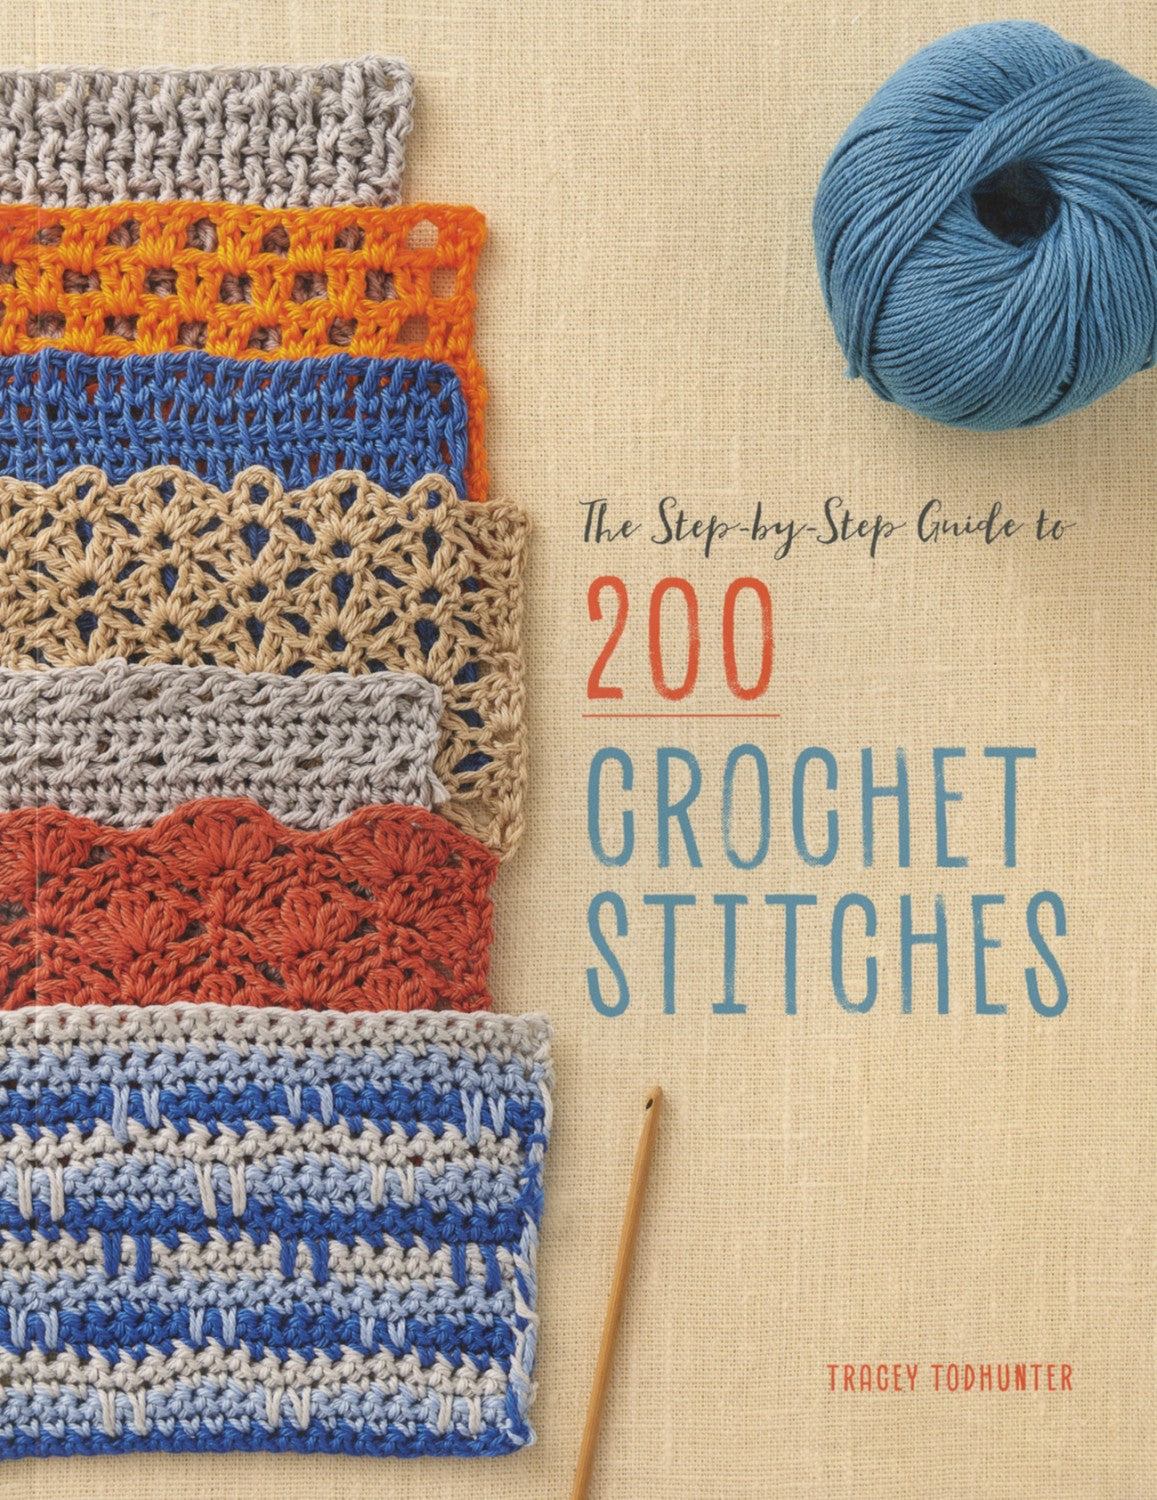 How to color pool in crochet with this great step-by-step guide